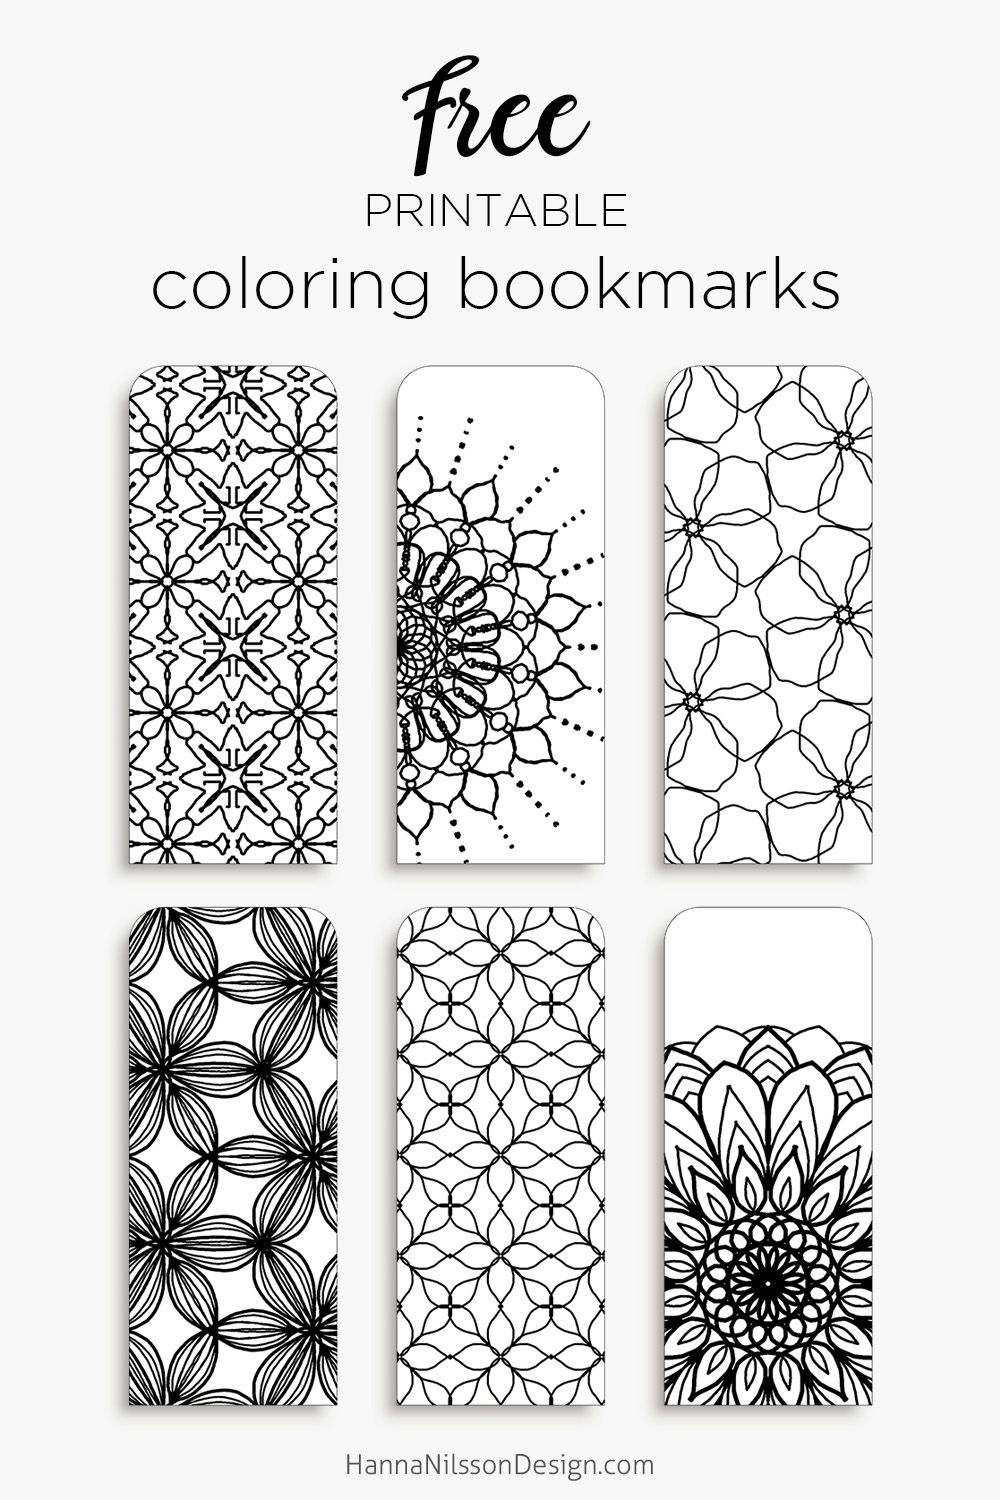 Coloring Pages ~ Free Printable Christmas Bookmarks What You Getng - Free Printable Christmas Bookmarks To Color